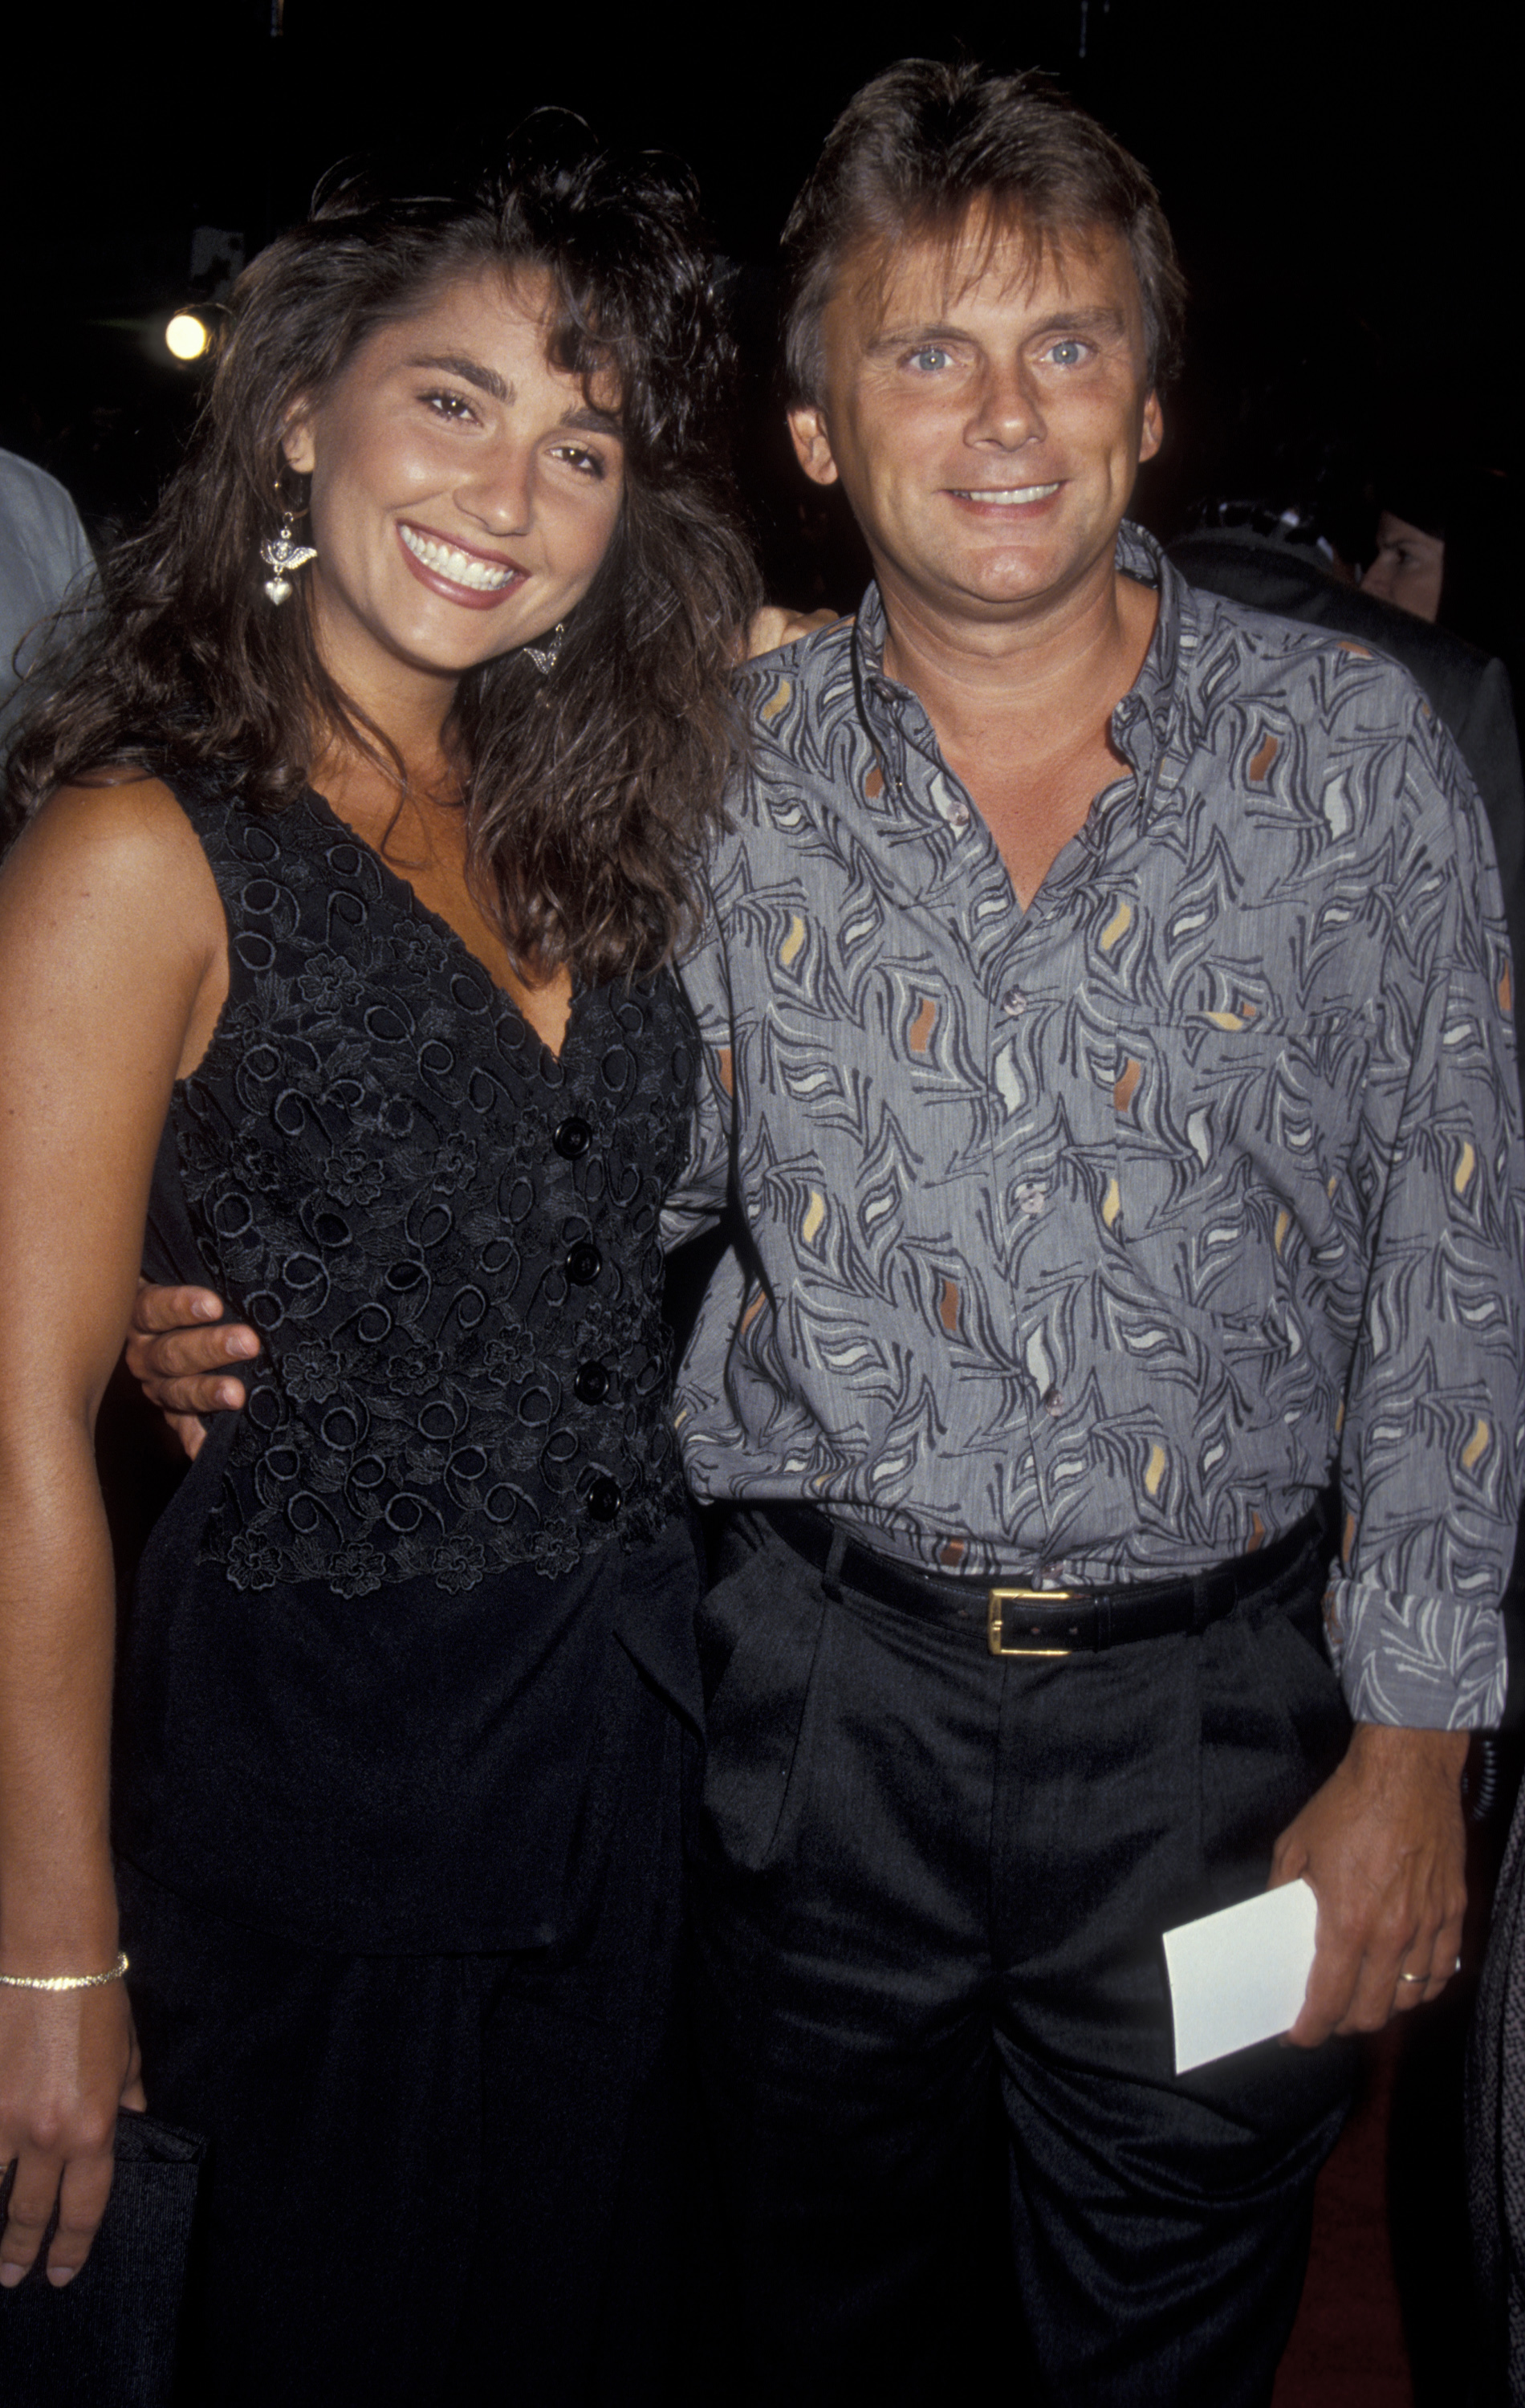 Pat Sajak and Lesly Brown at the premiere of "Mr. Saturday Night" on September 22, 1992 | Source: Getty Images